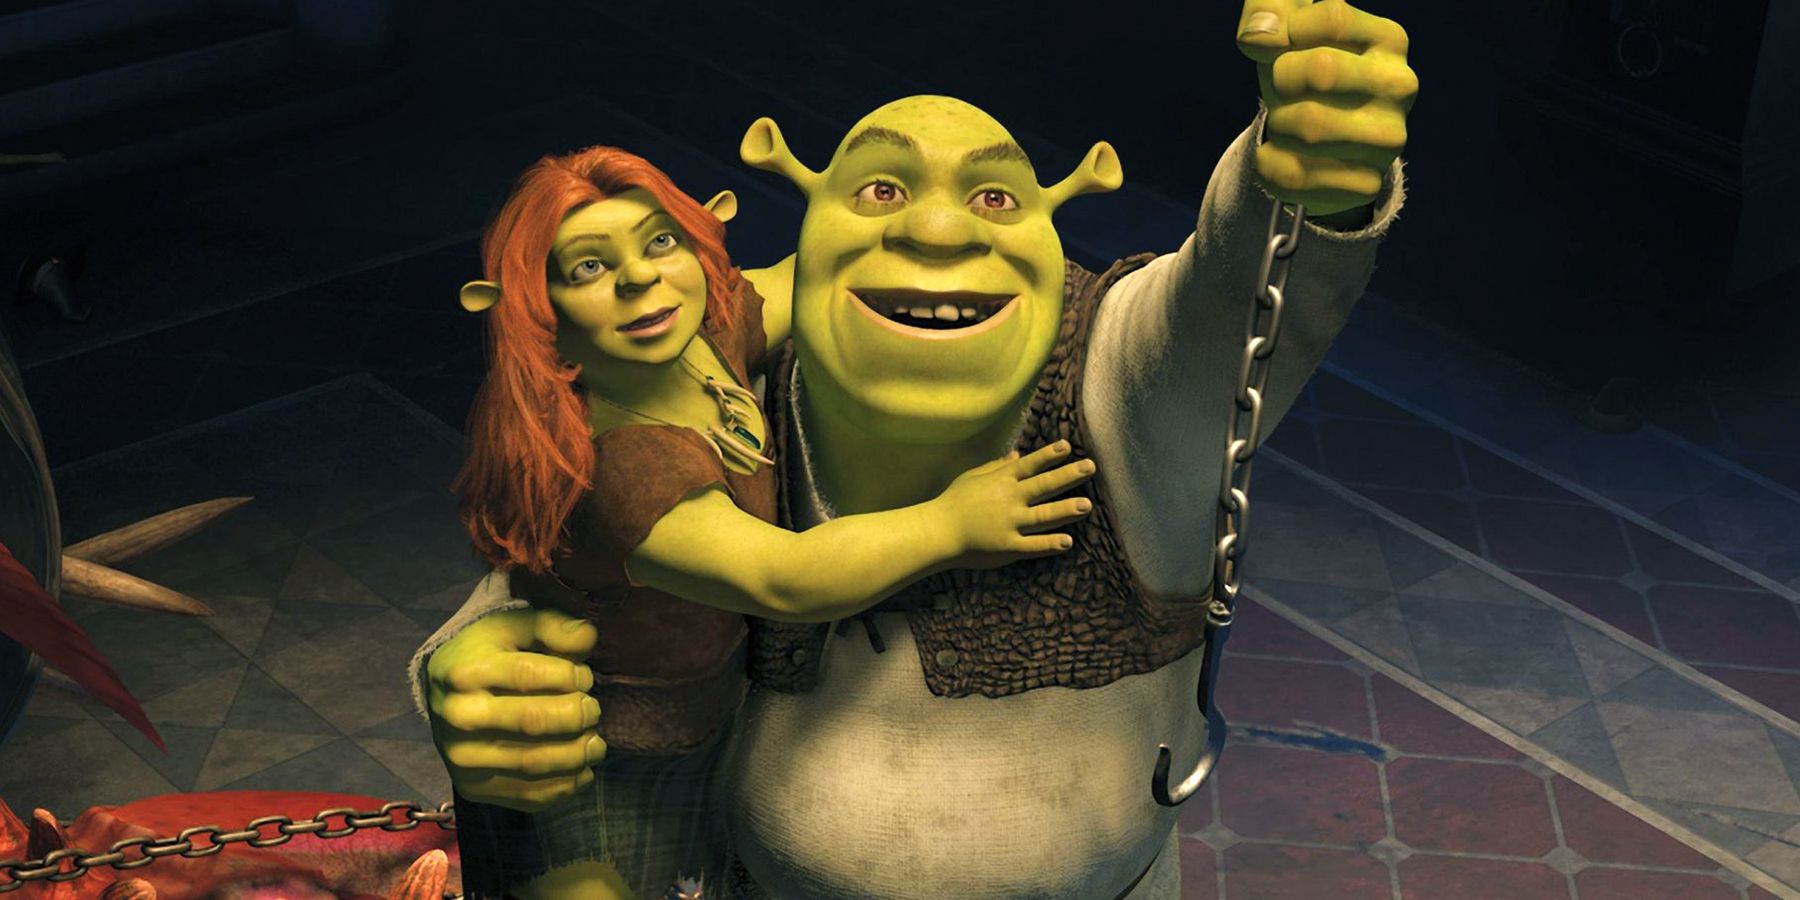 Shrek, holding a suspended chain, embraces Fiona in Shrek Forever After